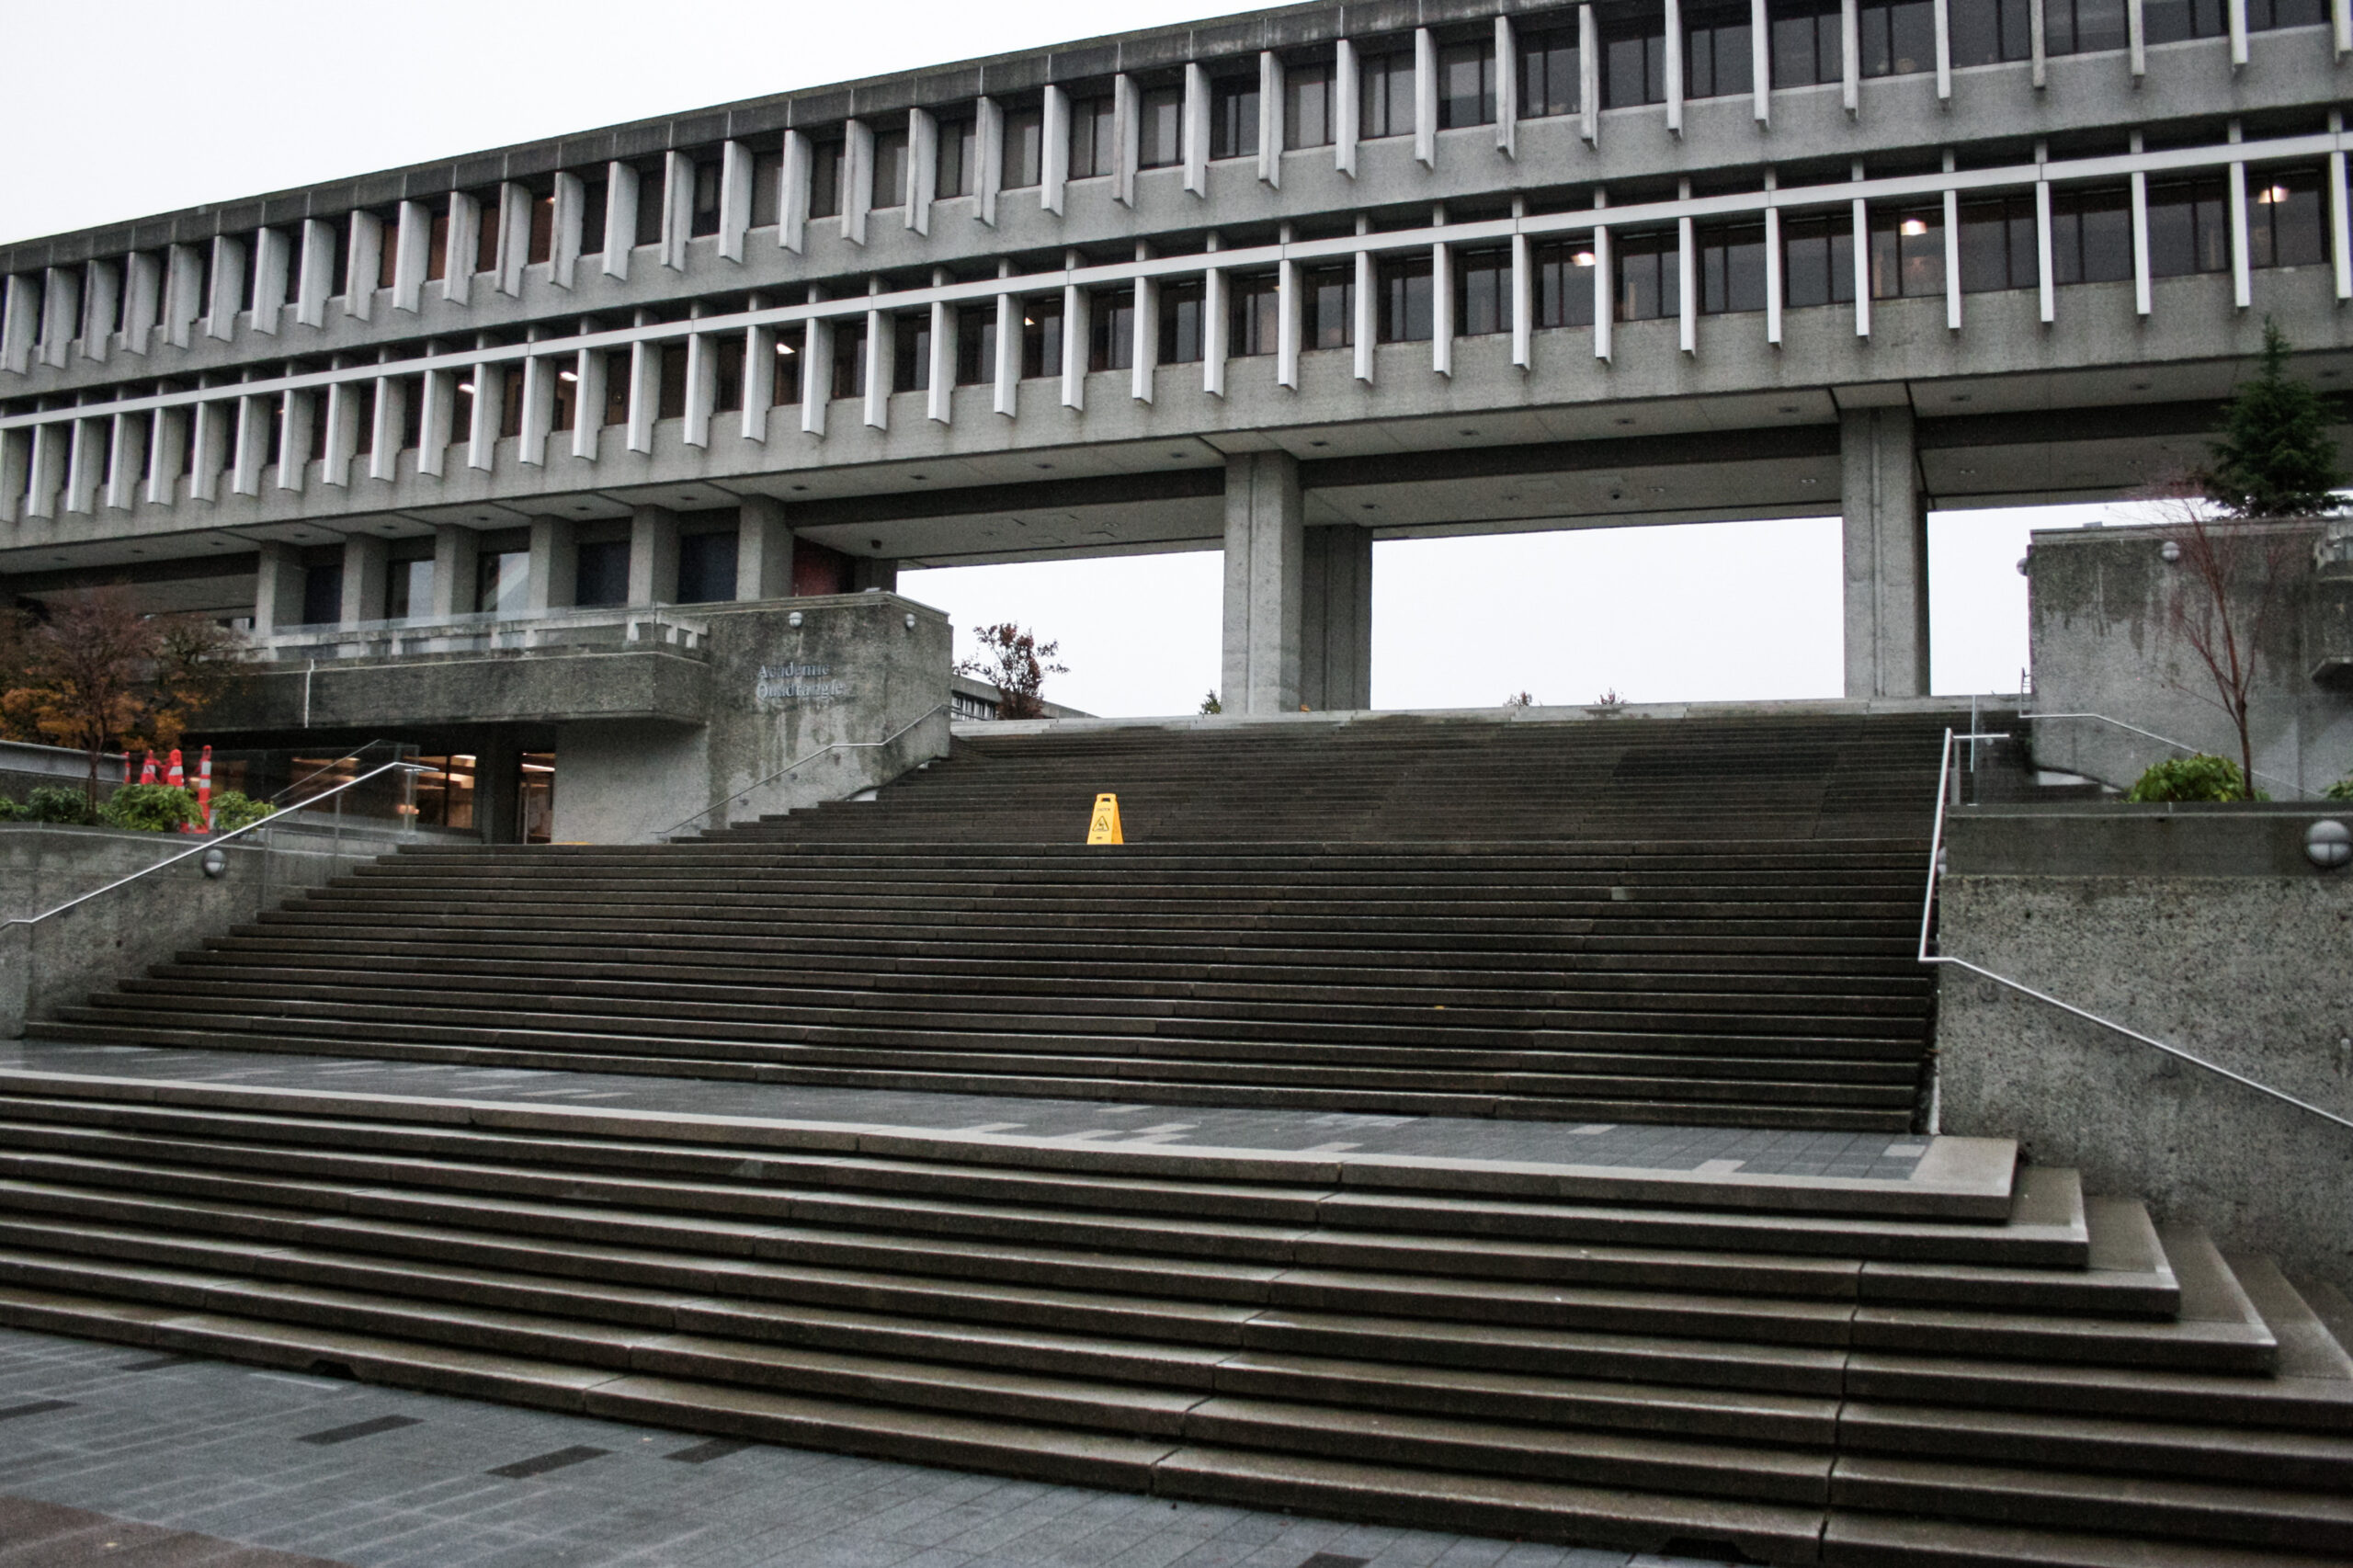 This is a photo of the outside of the academic quadrangle building at the SFU Burnaby campus. The square building is concrete with many large windows.